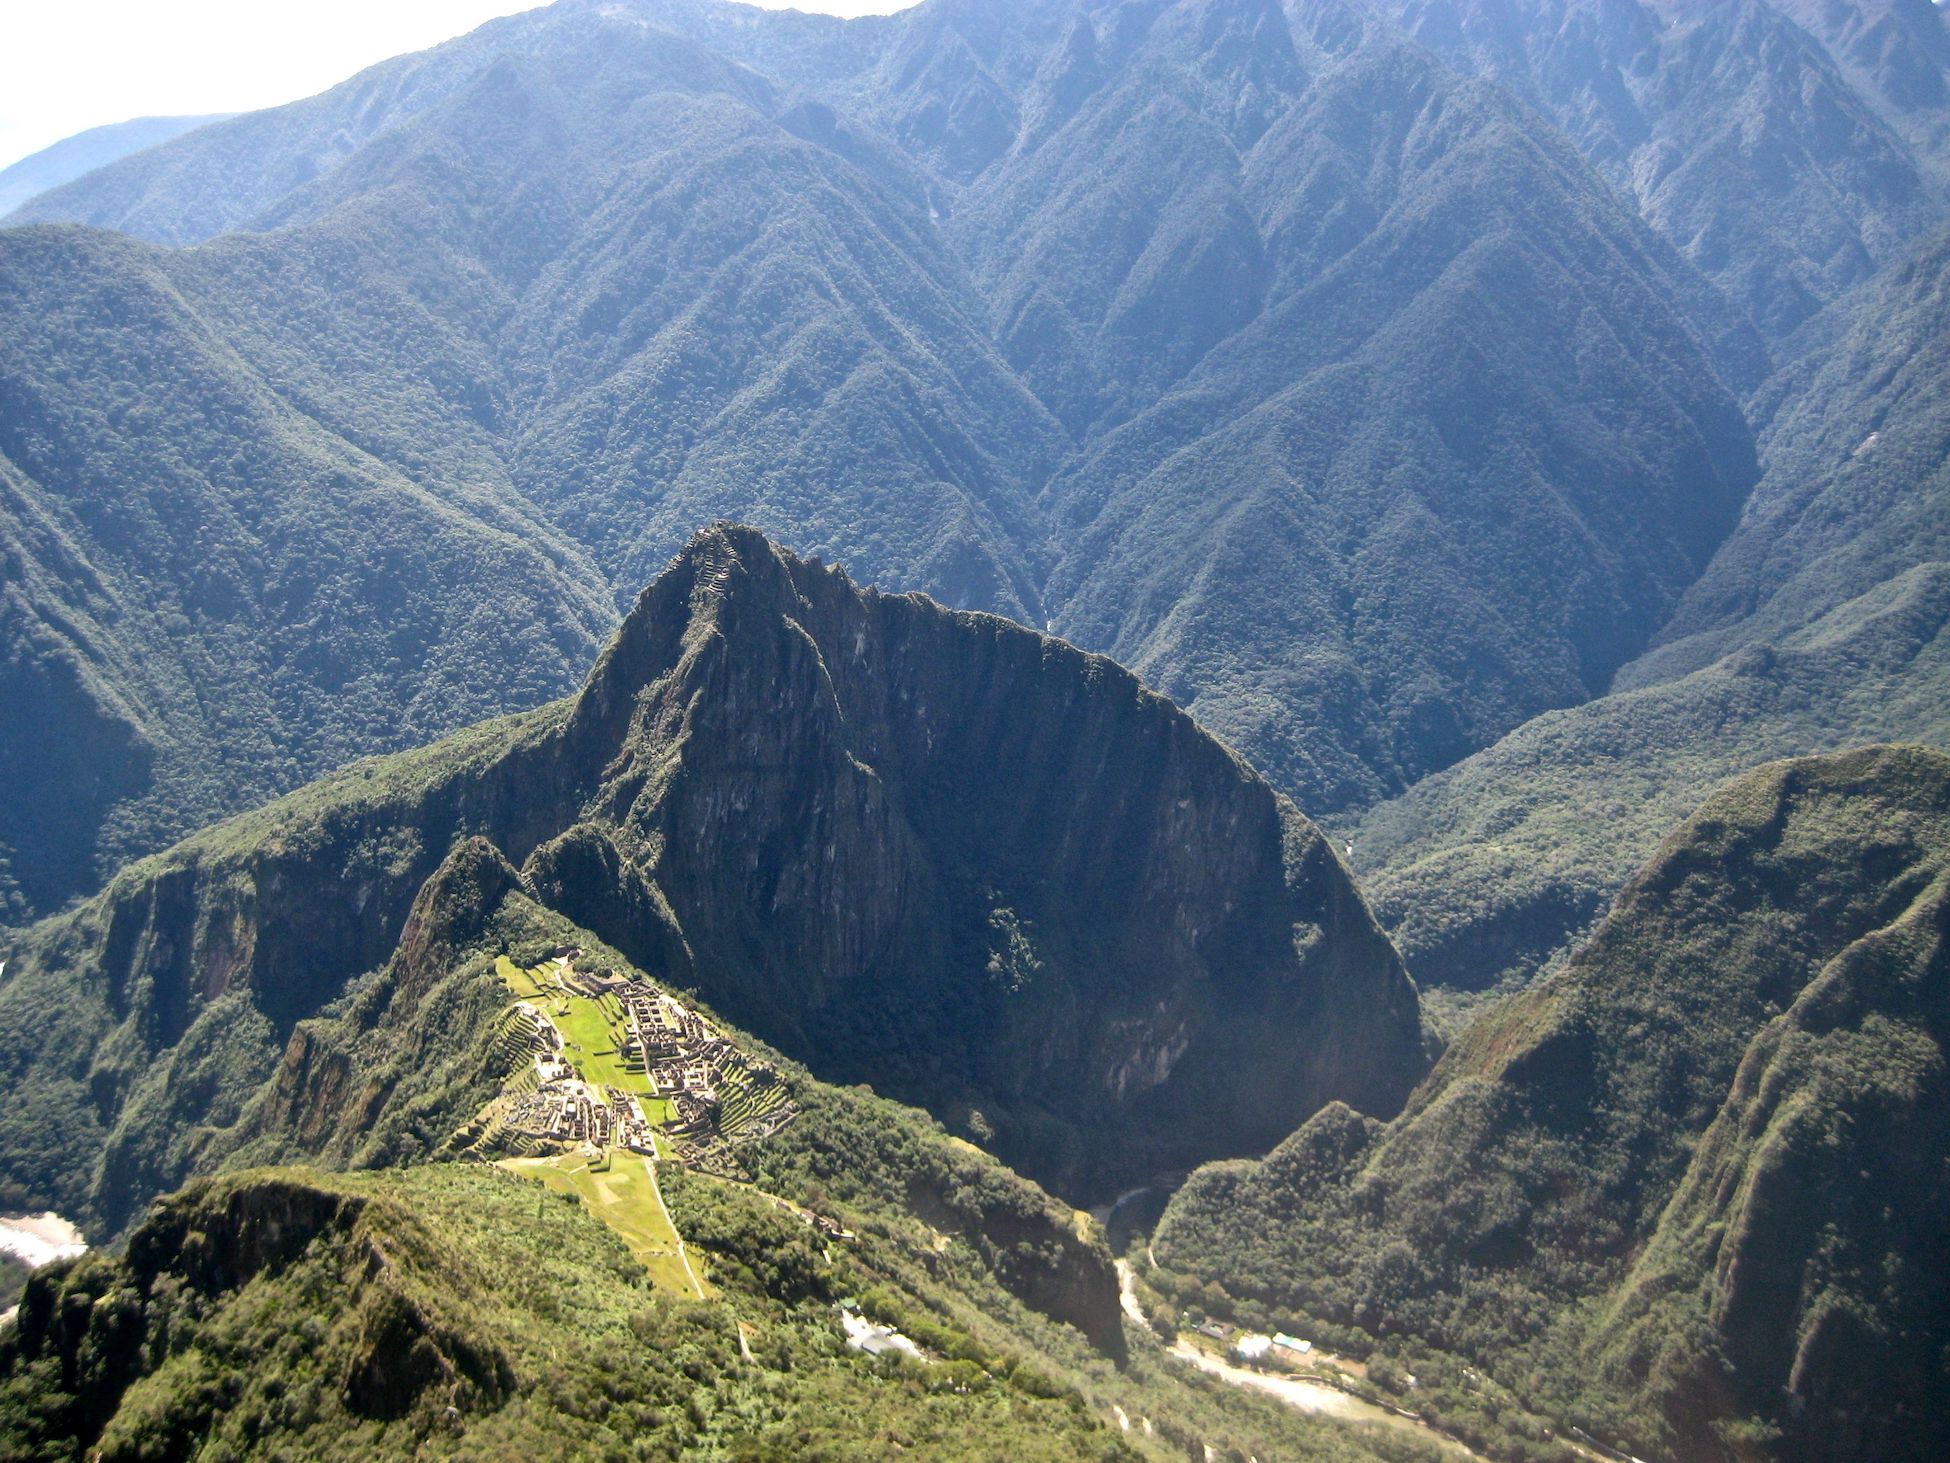 Machu Picchu - a trip to Peru is helpful but not the only way to learn Spanish faster